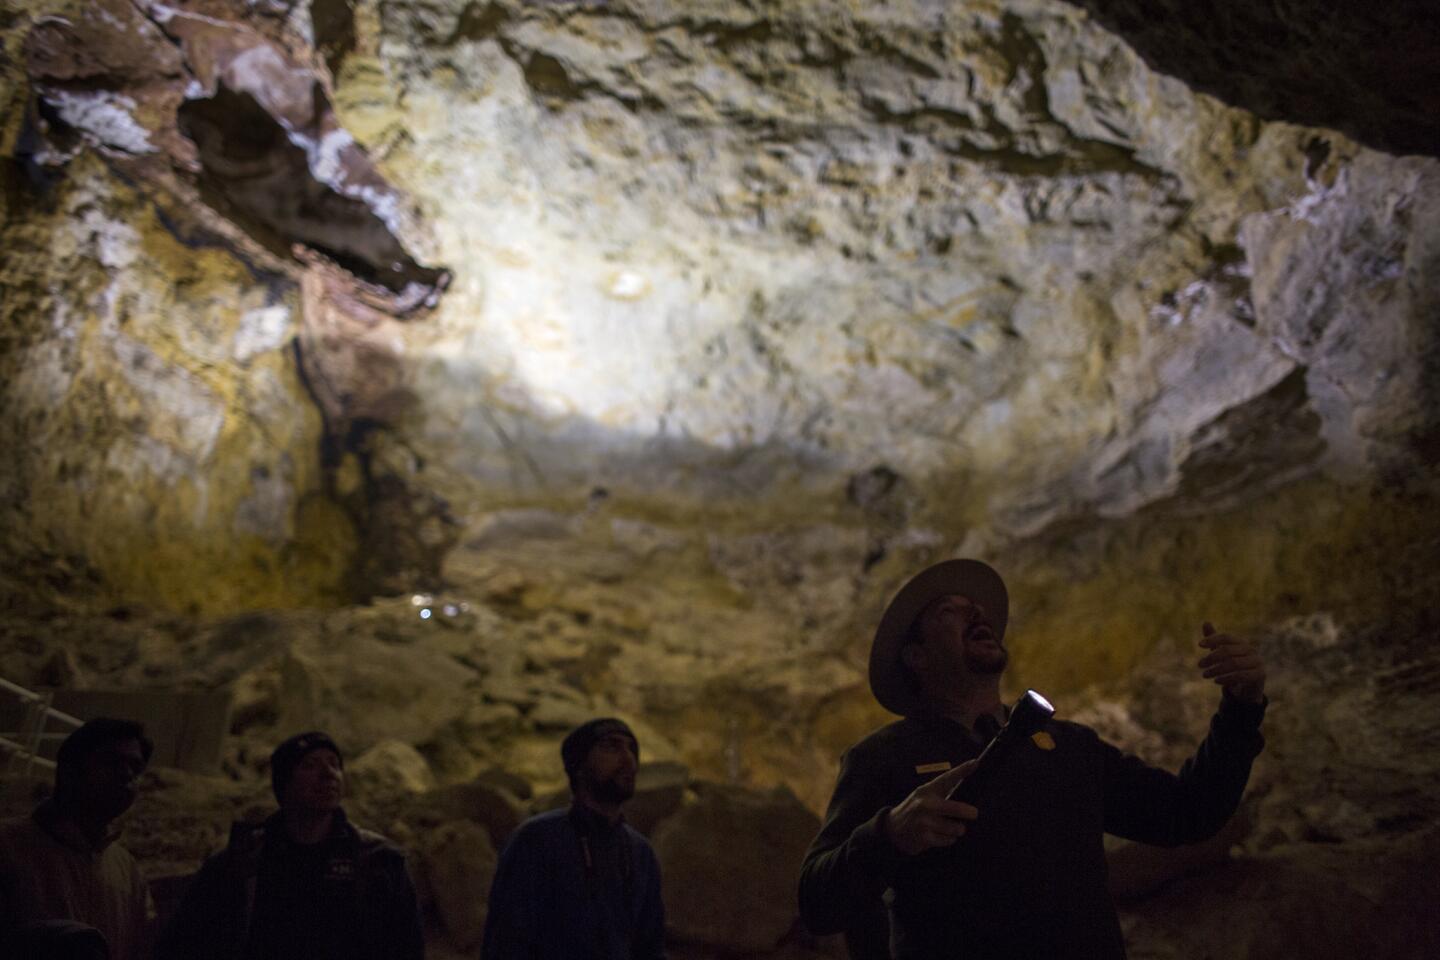 Park ranger and tour guide Brad Yoder, right, guides visitors through Jewel Cave National Monument, located south of Custer, S.D.